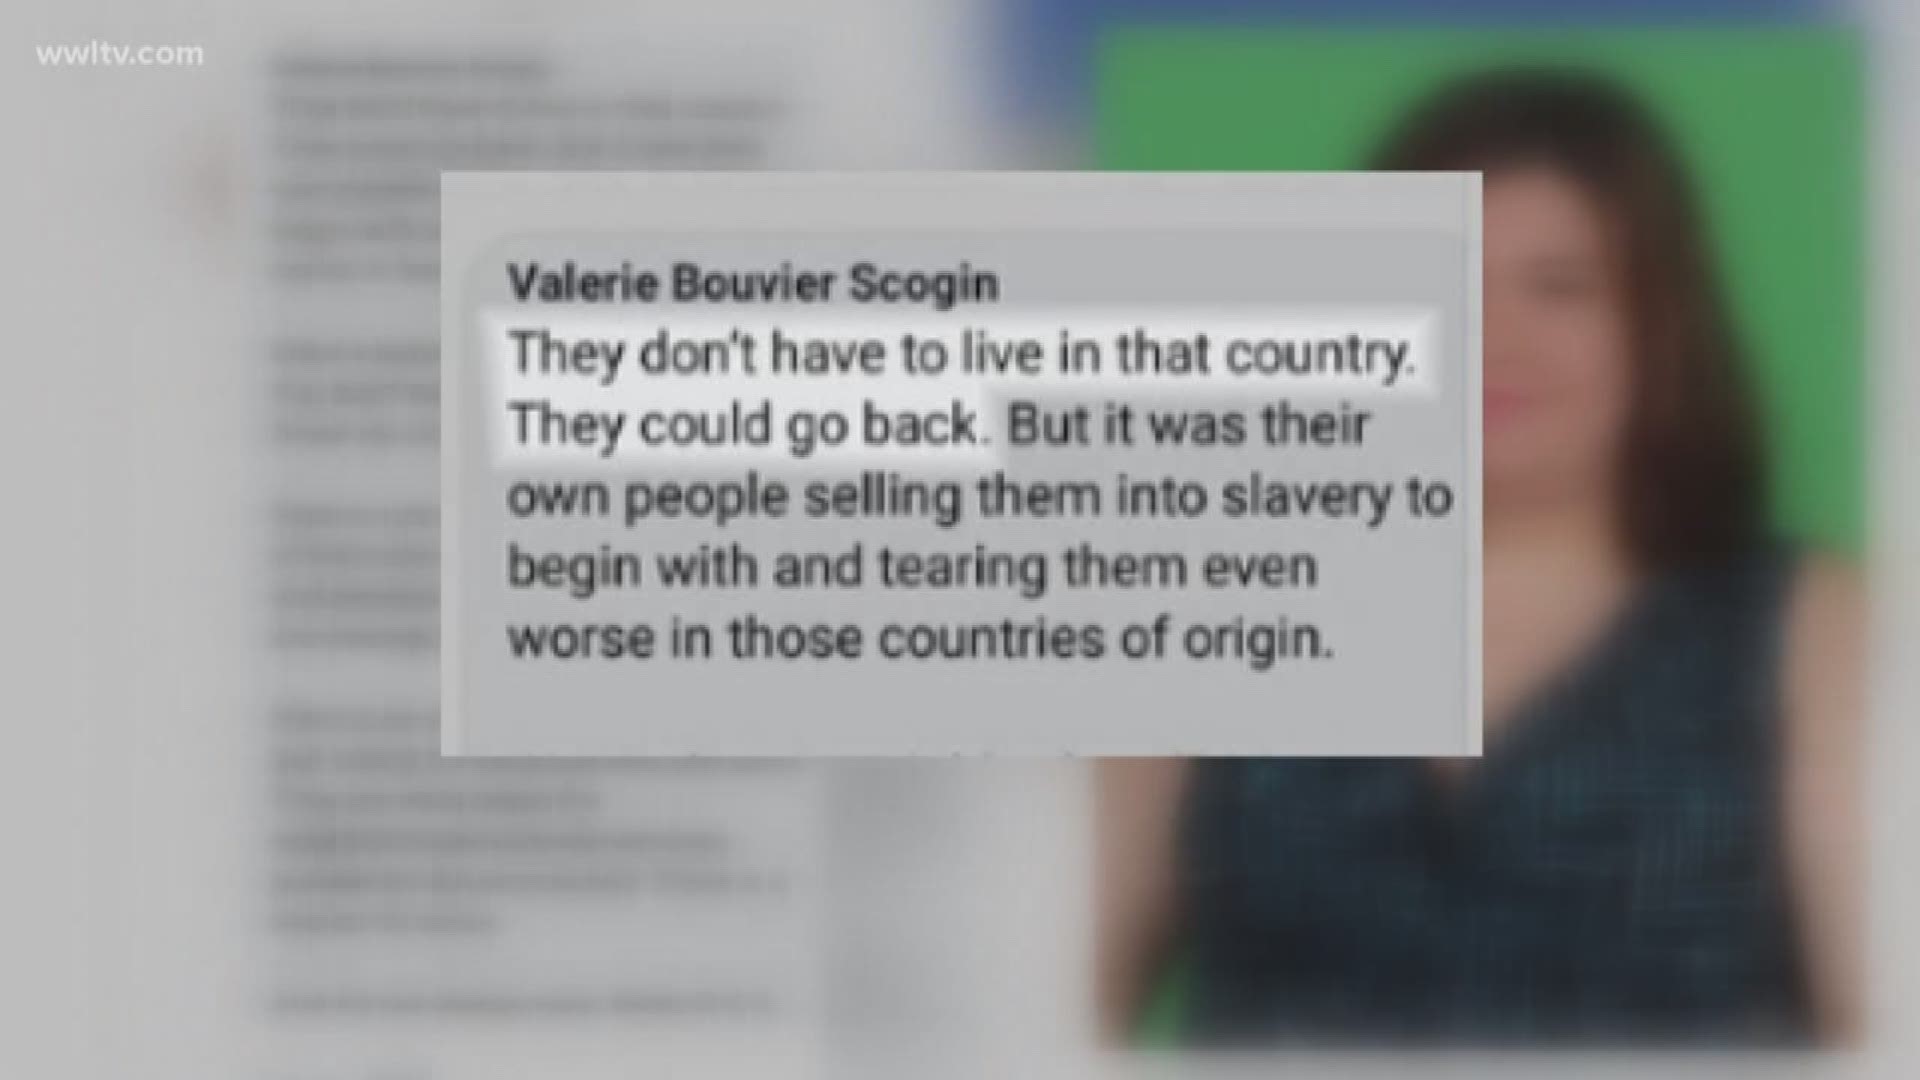 Scogin posted on Facebook saying "they don't have to live in that country. they could go back," the post goes on to say "Want to not be stereotyped, tell people of that color to quit acting like animals."